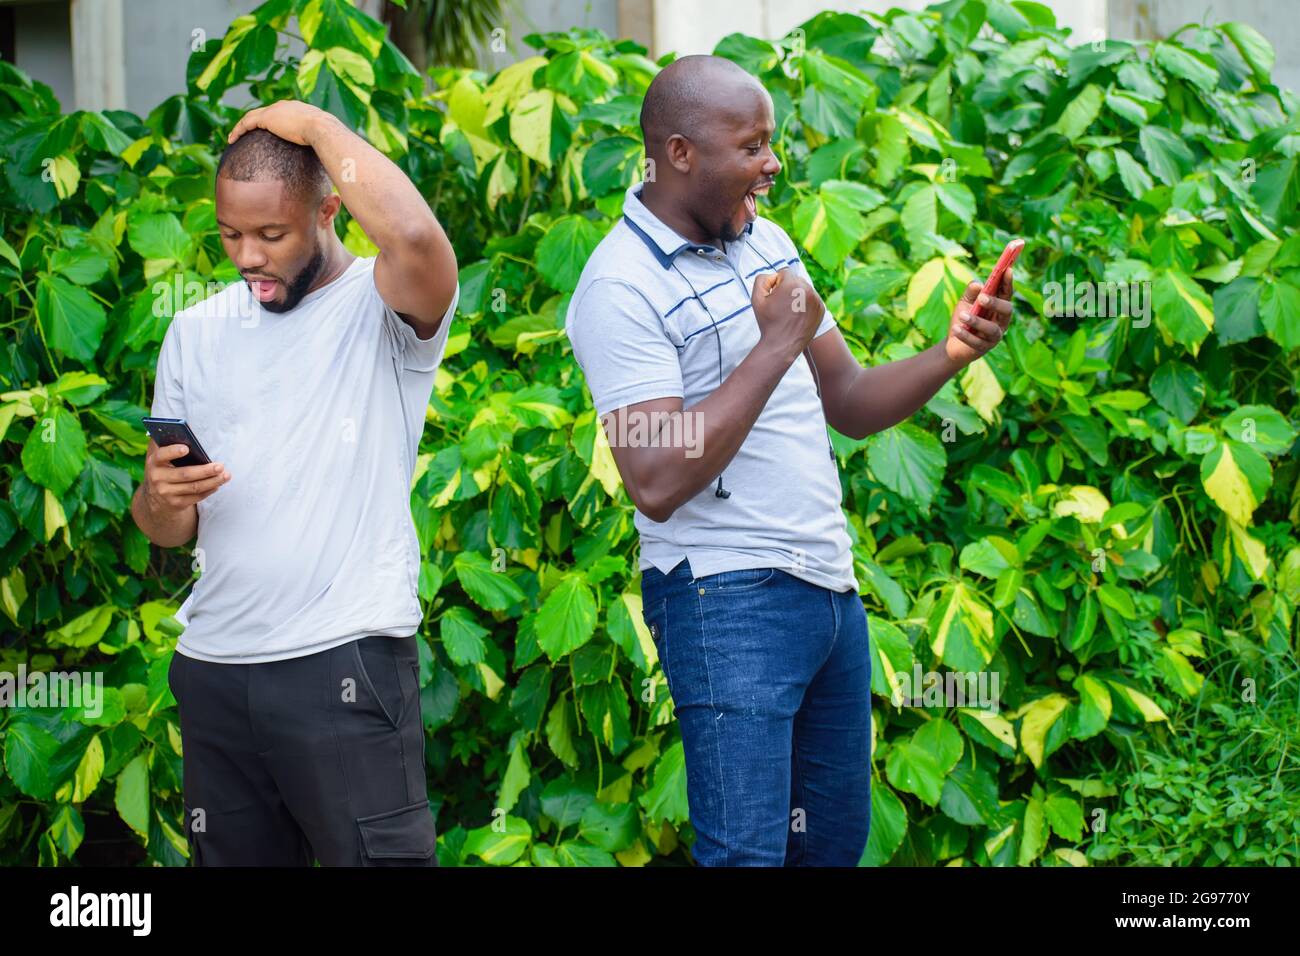 two African guys or men holding smart phones with different thoughtful and facial expression Stock Photo